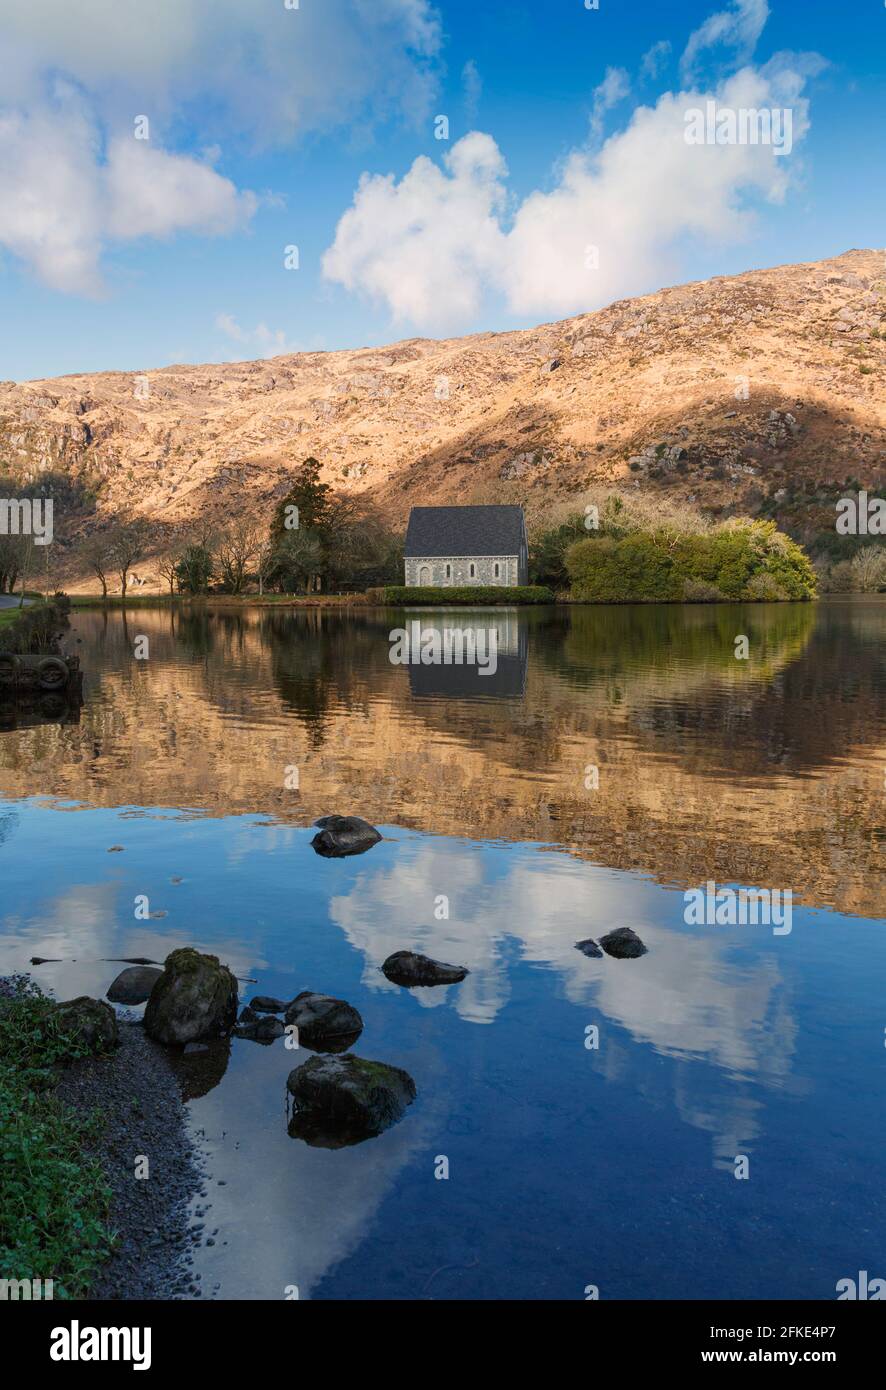 Gougane Barra, County Cork, West Cork, Republic of Ireland. Eire.  St. Finbarr's oratory.  The oratory at the picturesque spot is the final destinatio Stock Photo